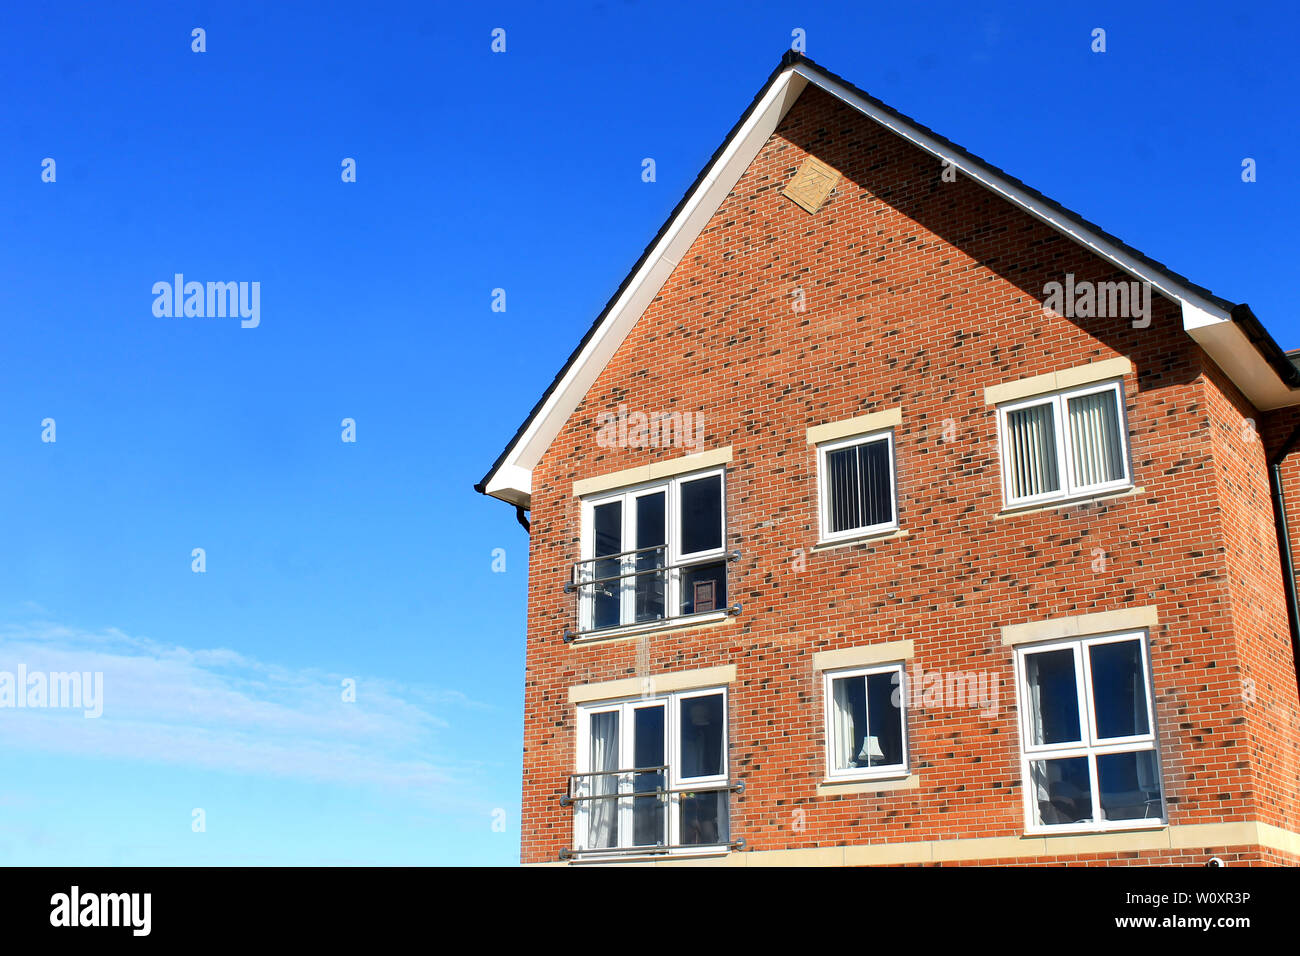 Corner of modern house with blue sky background, Scarborough, England. Stock Photo